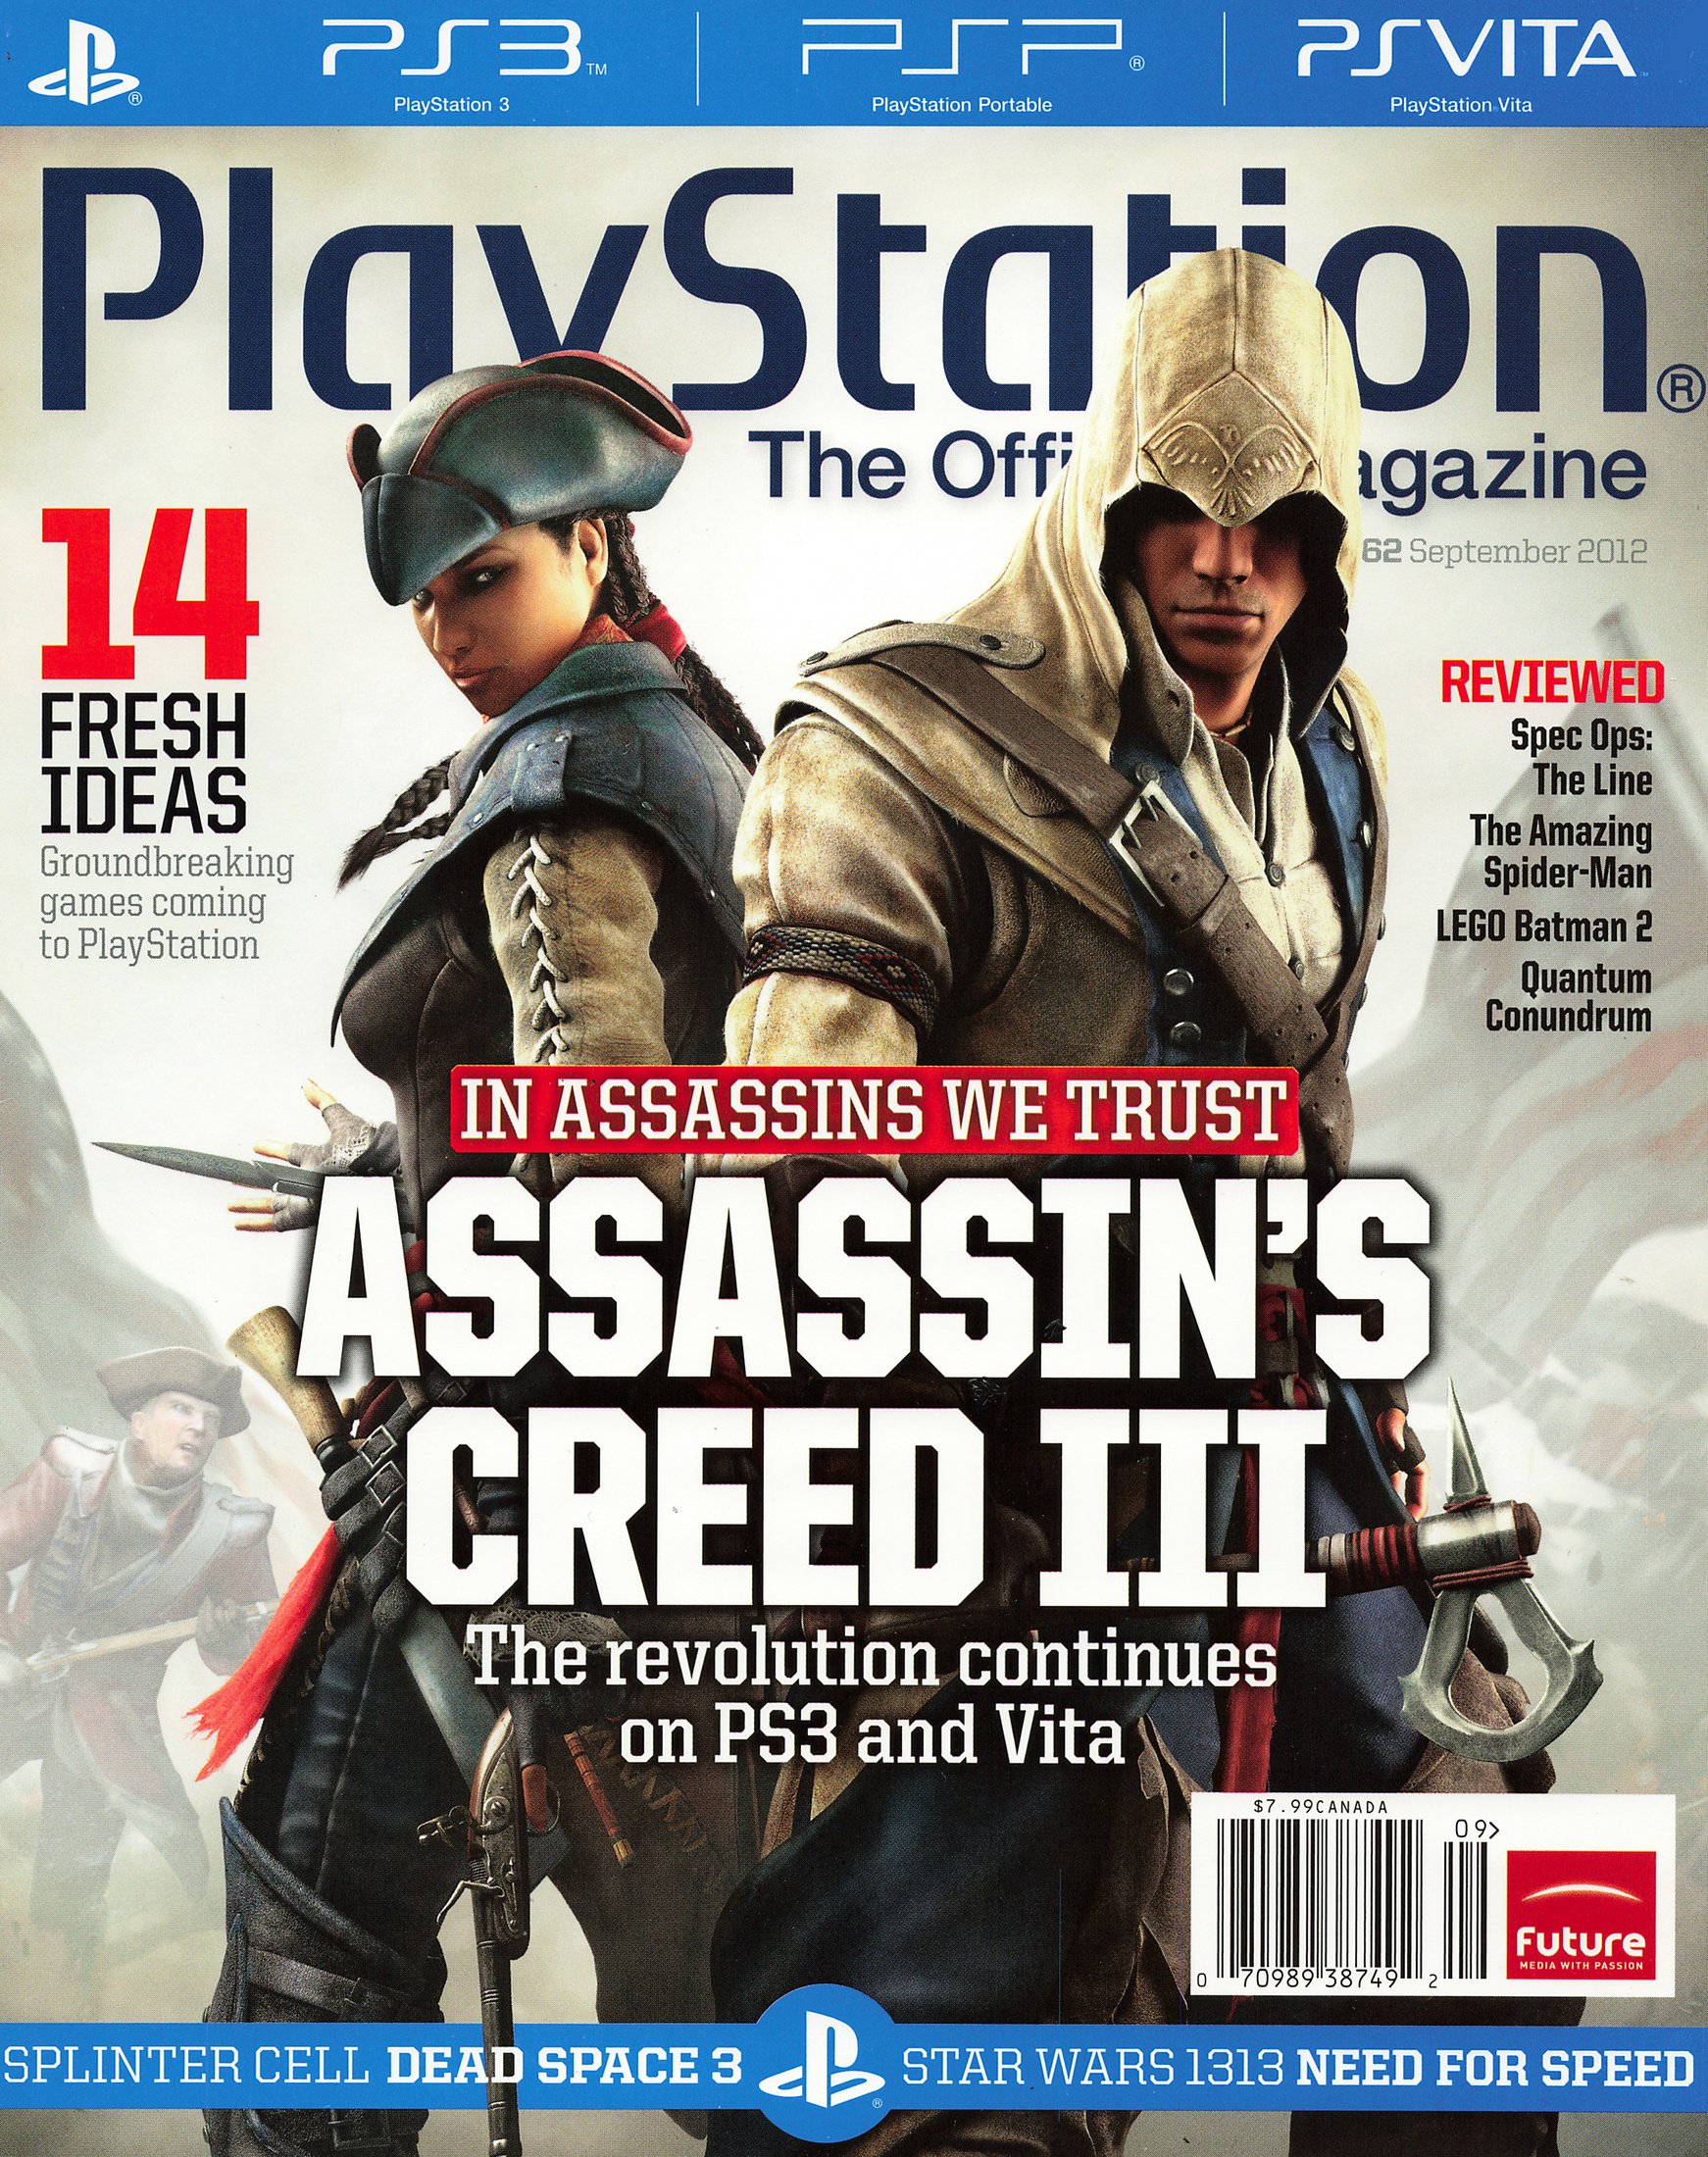 Playstation: The Official Magazine Issue 62 (September 2012)